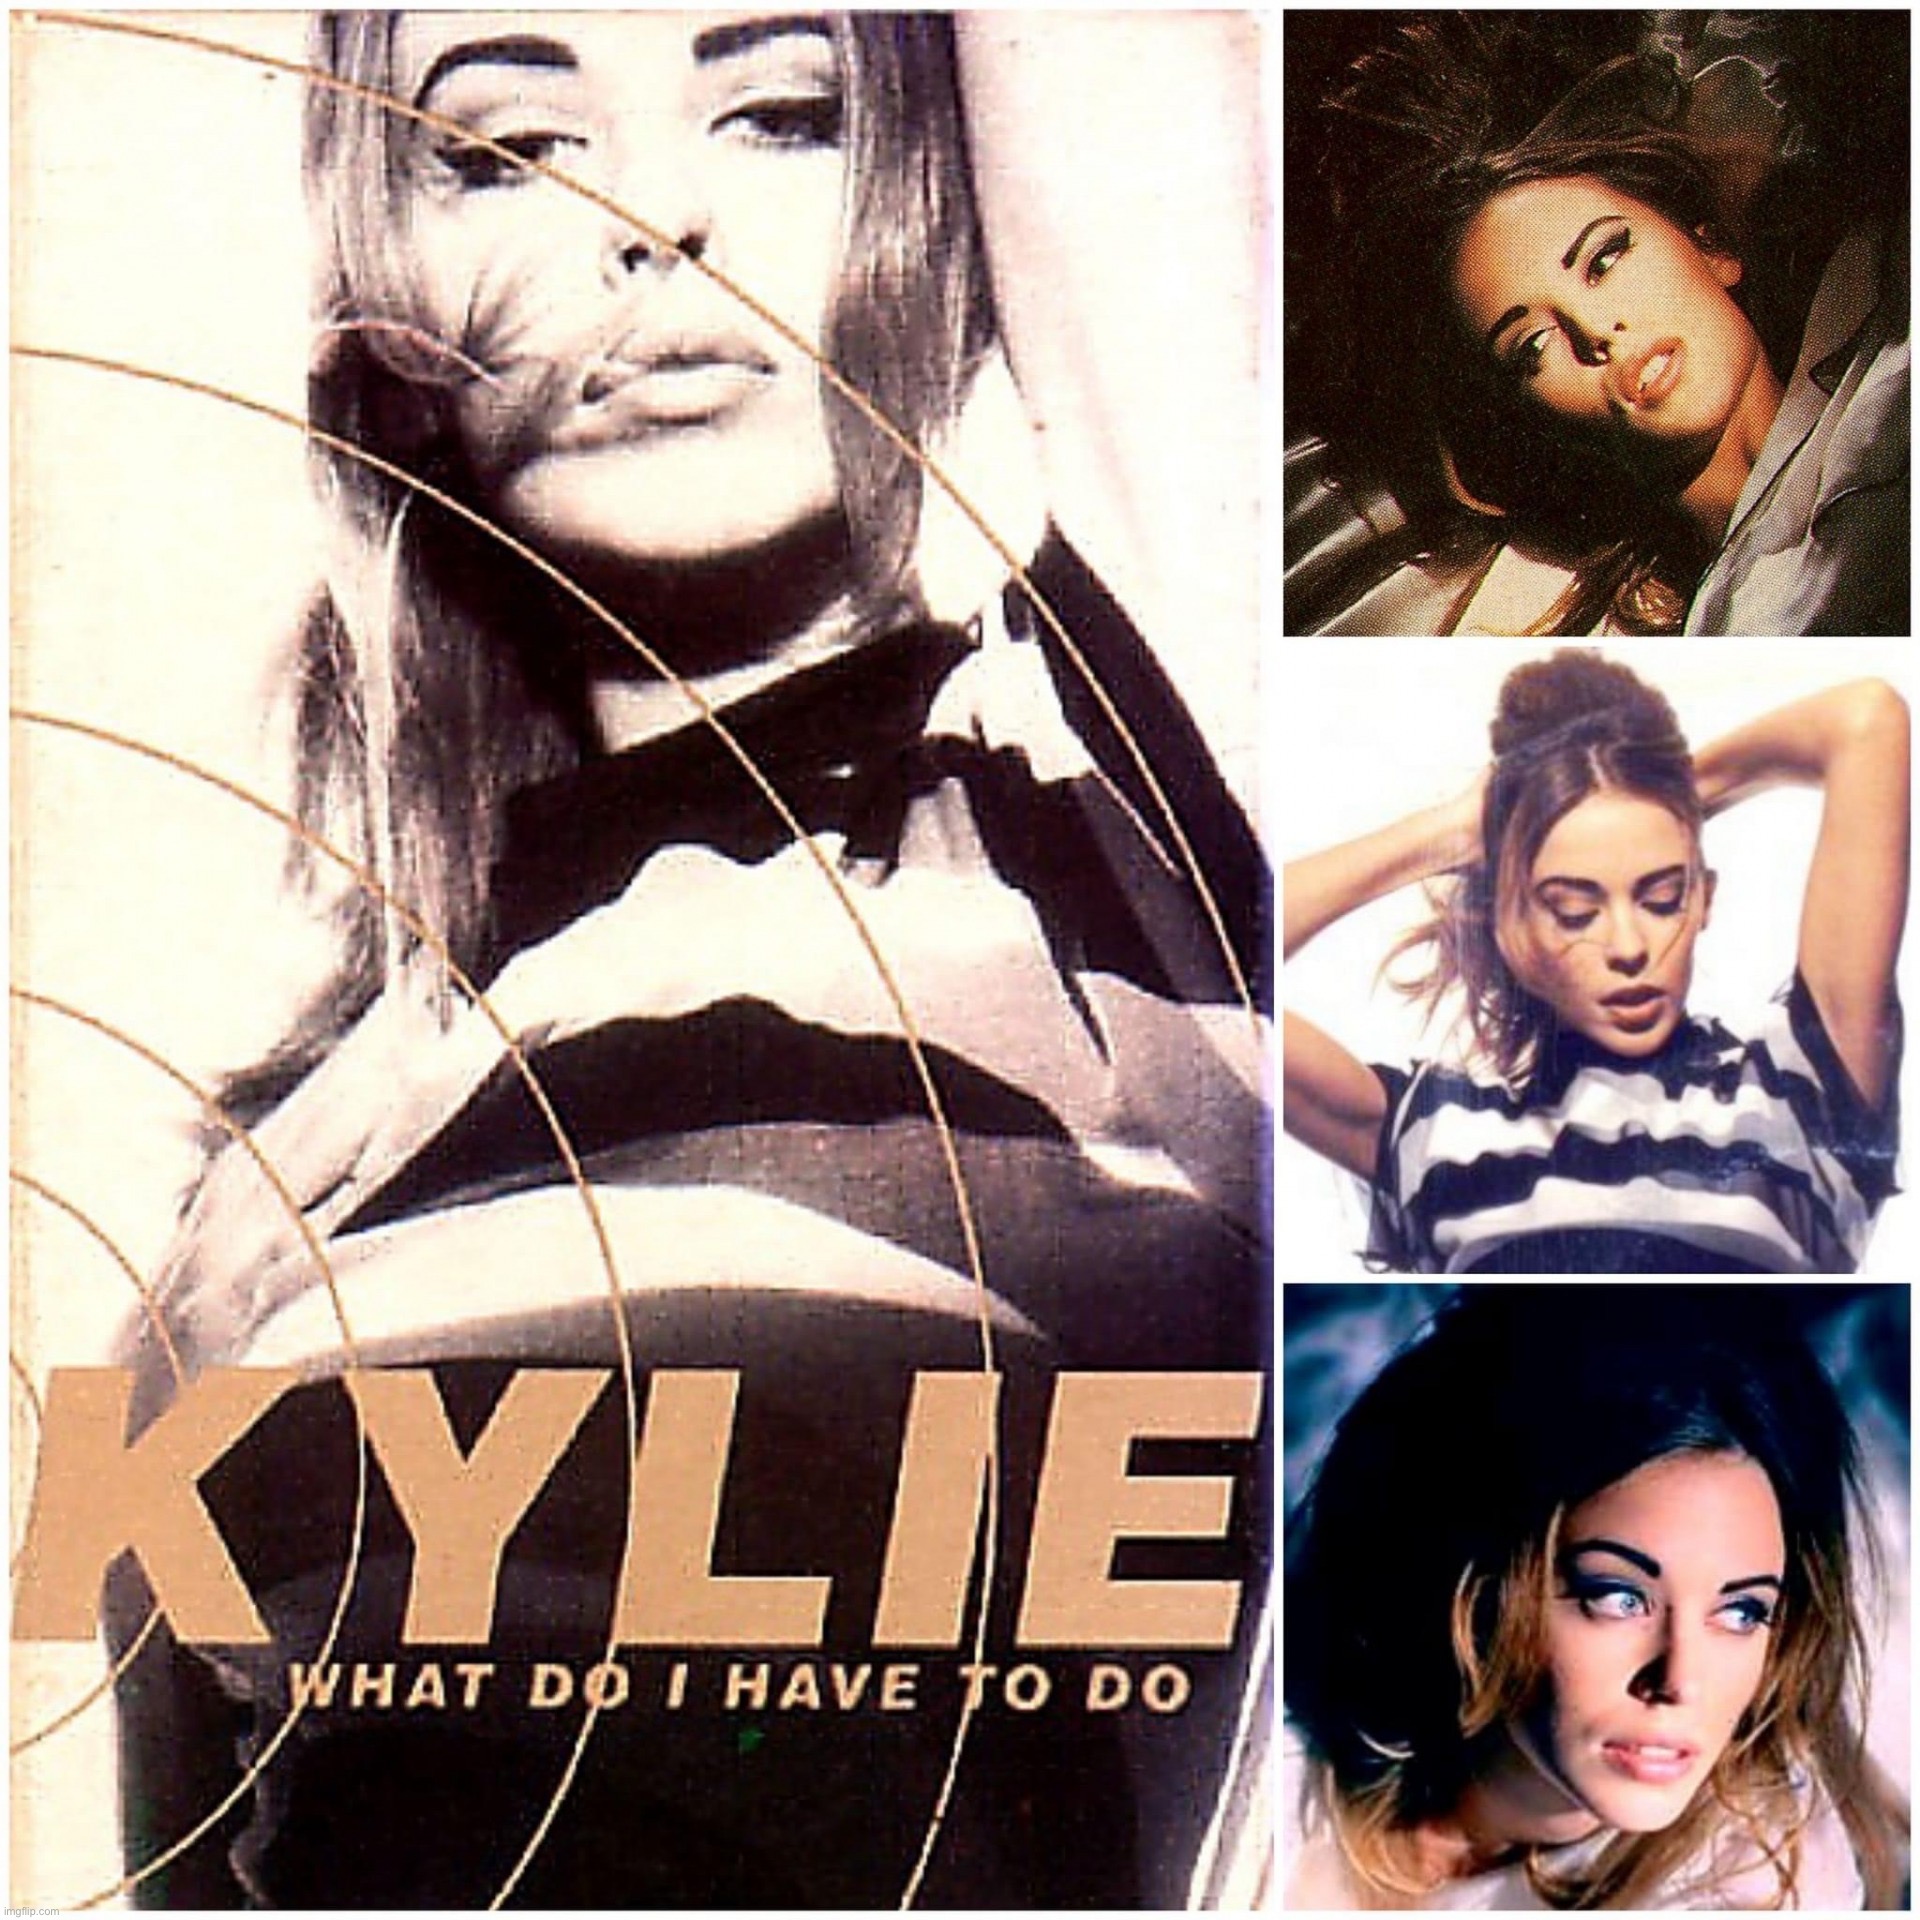 Kylie what do I have to do | image tagged in kylie what do i have to do | made w/ Imgflip meme maker